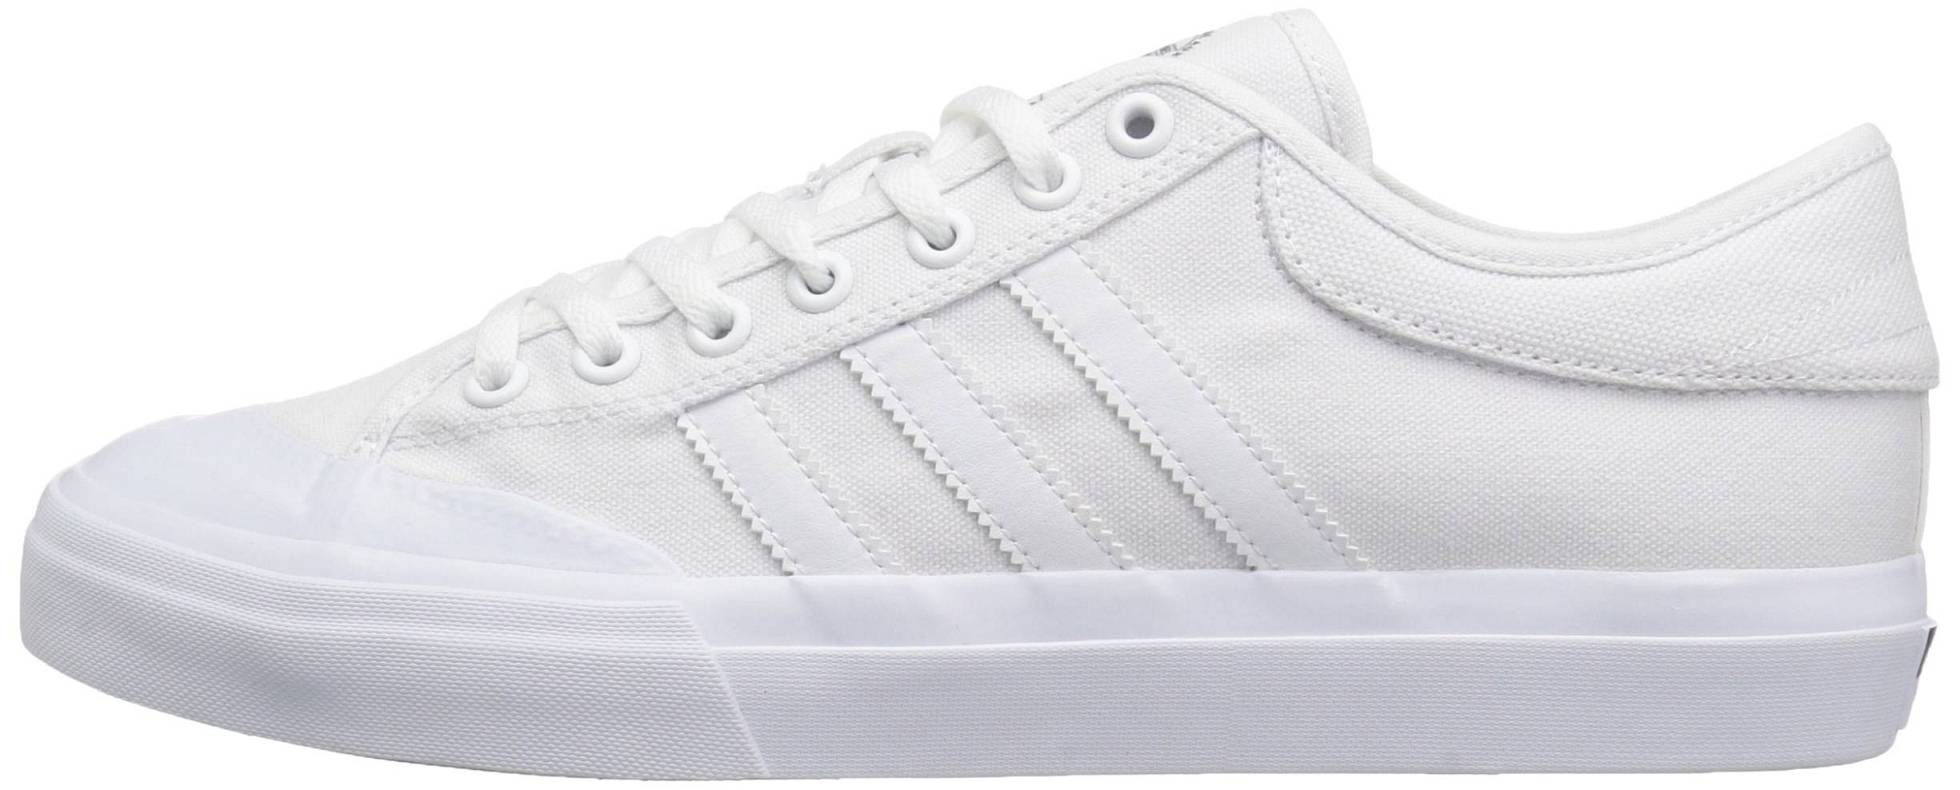 Adidas Matchcourt – Shoes Reviews & Reasons To Buy